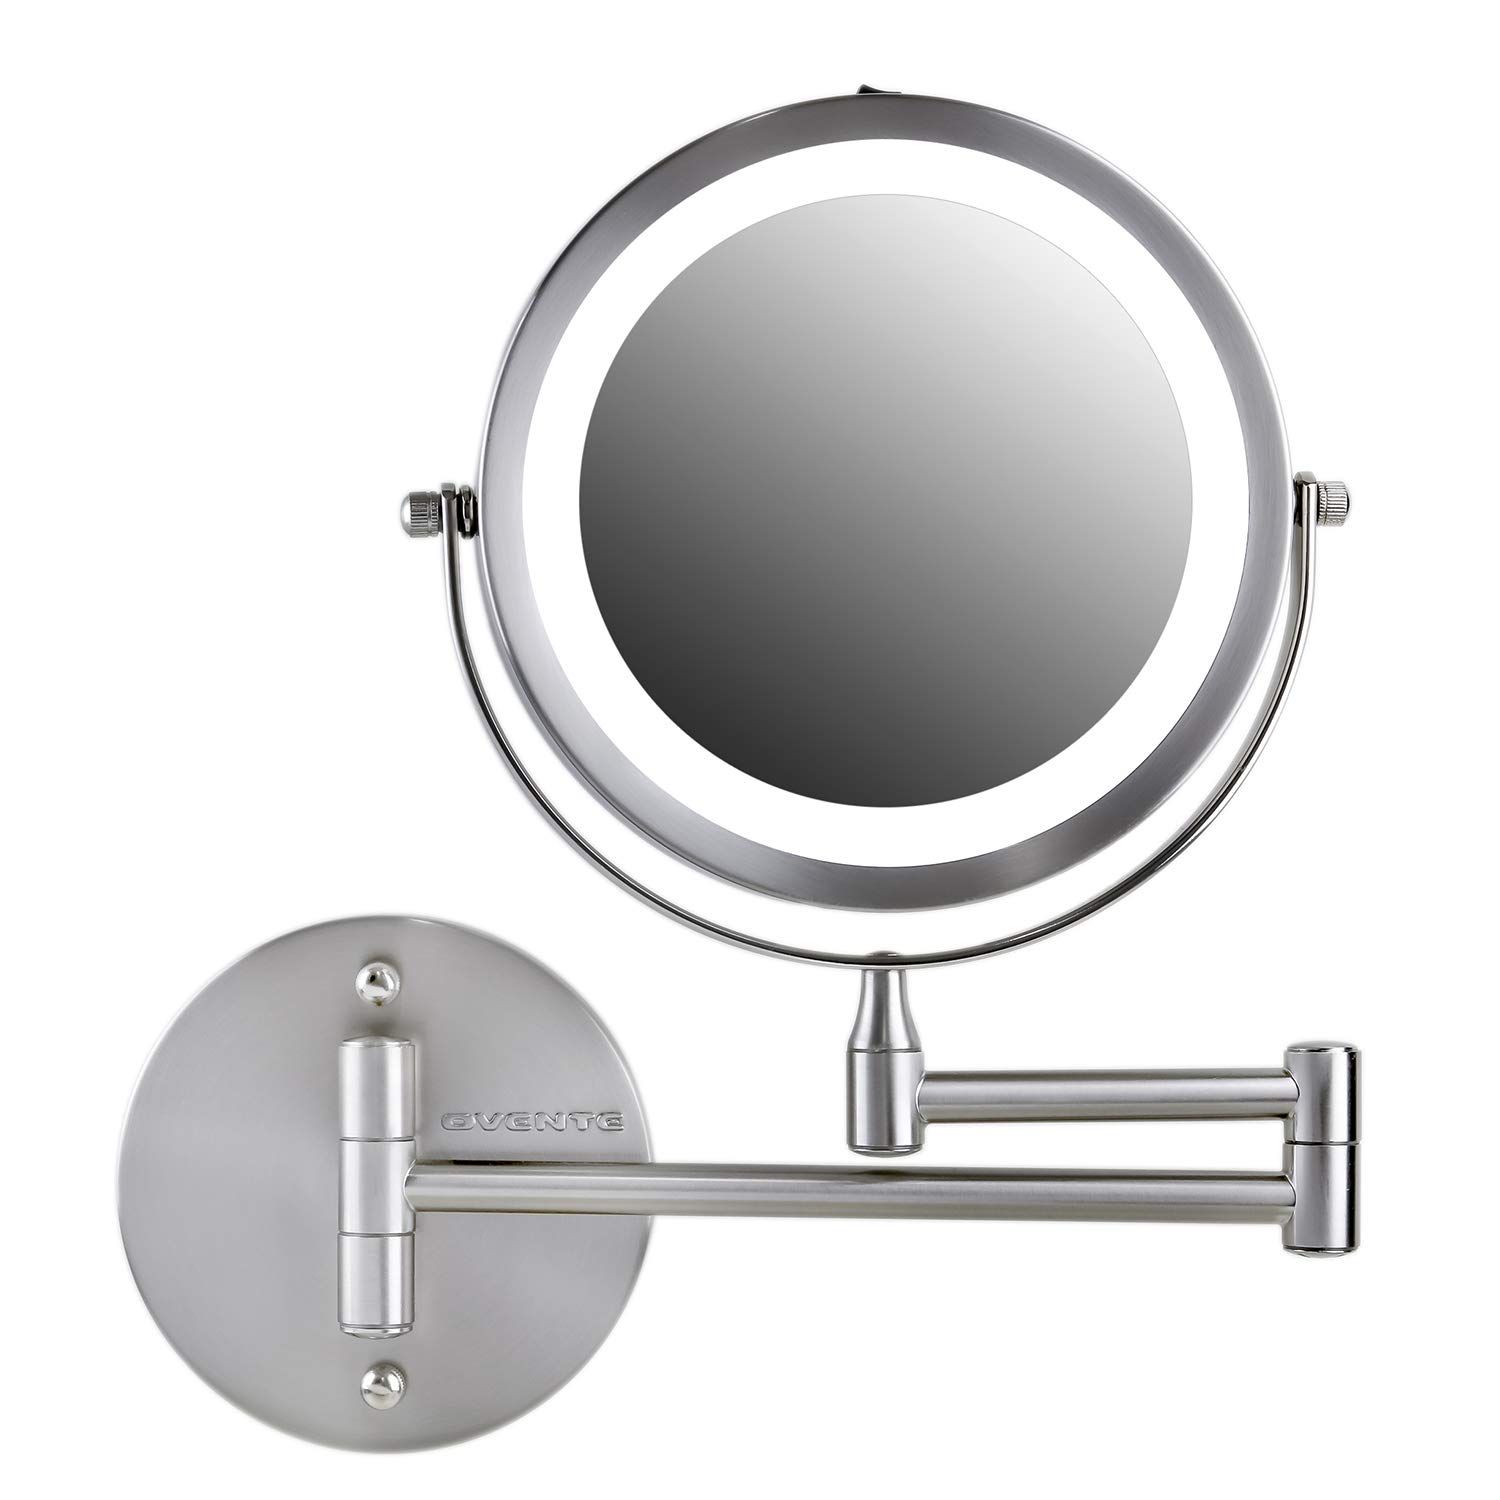 Ovente Lighted Wall Mount Makeup Mirrors 7 Inch 1x 10x Magnification Pertaining To Single Sided Polished Nickel Wall Mirrors (View 3 of 15)